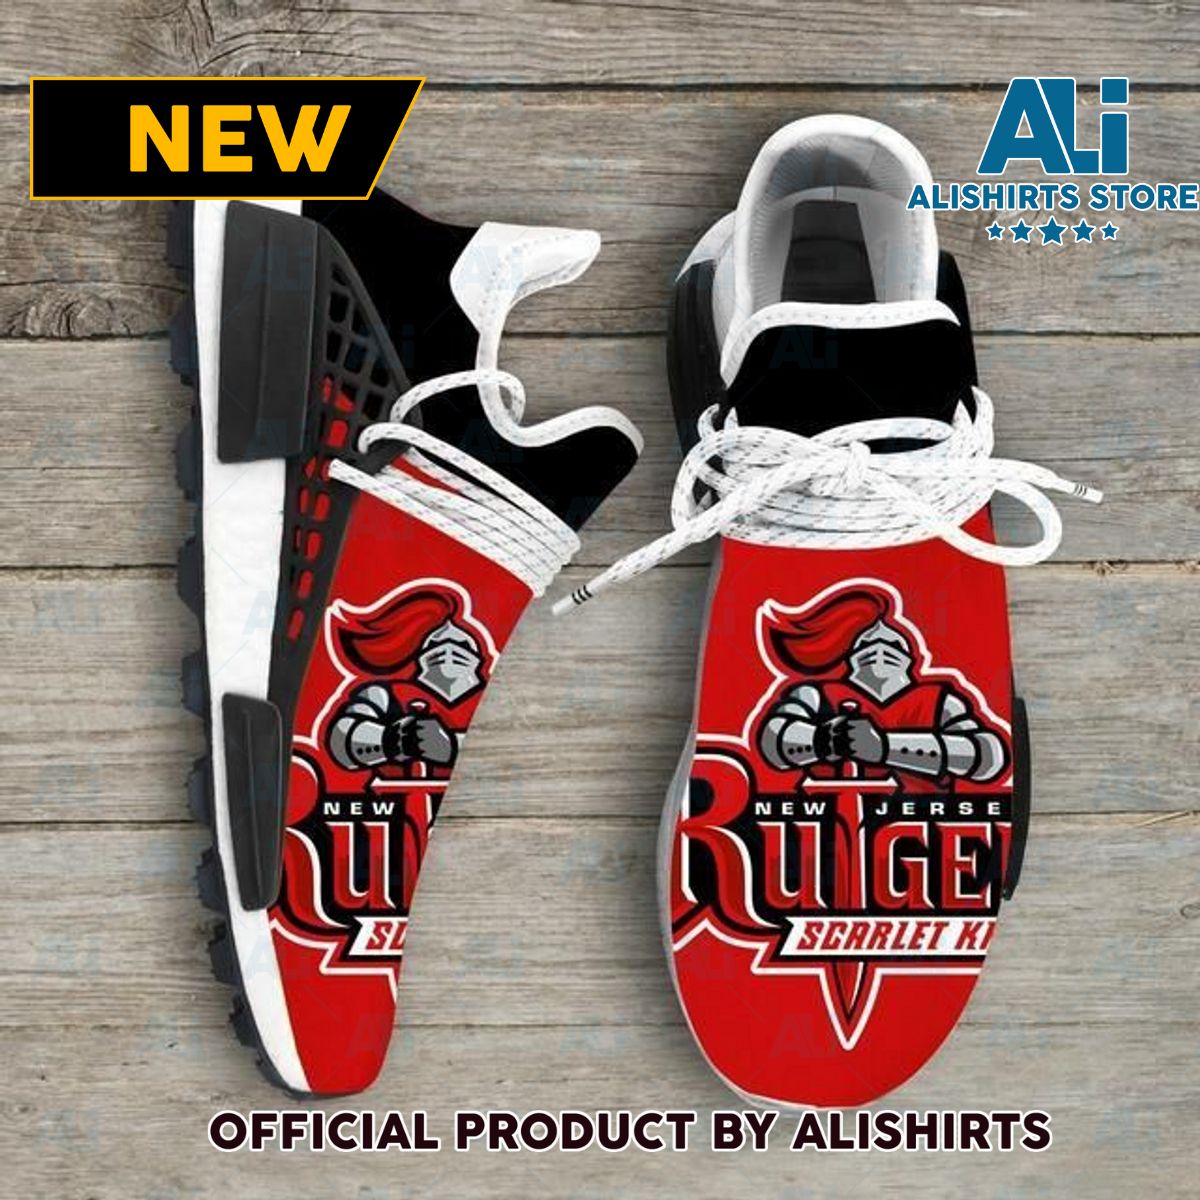 Rutgers Scarlet Knights Ncaa Human Race shoes Adidas NMD Sneakers